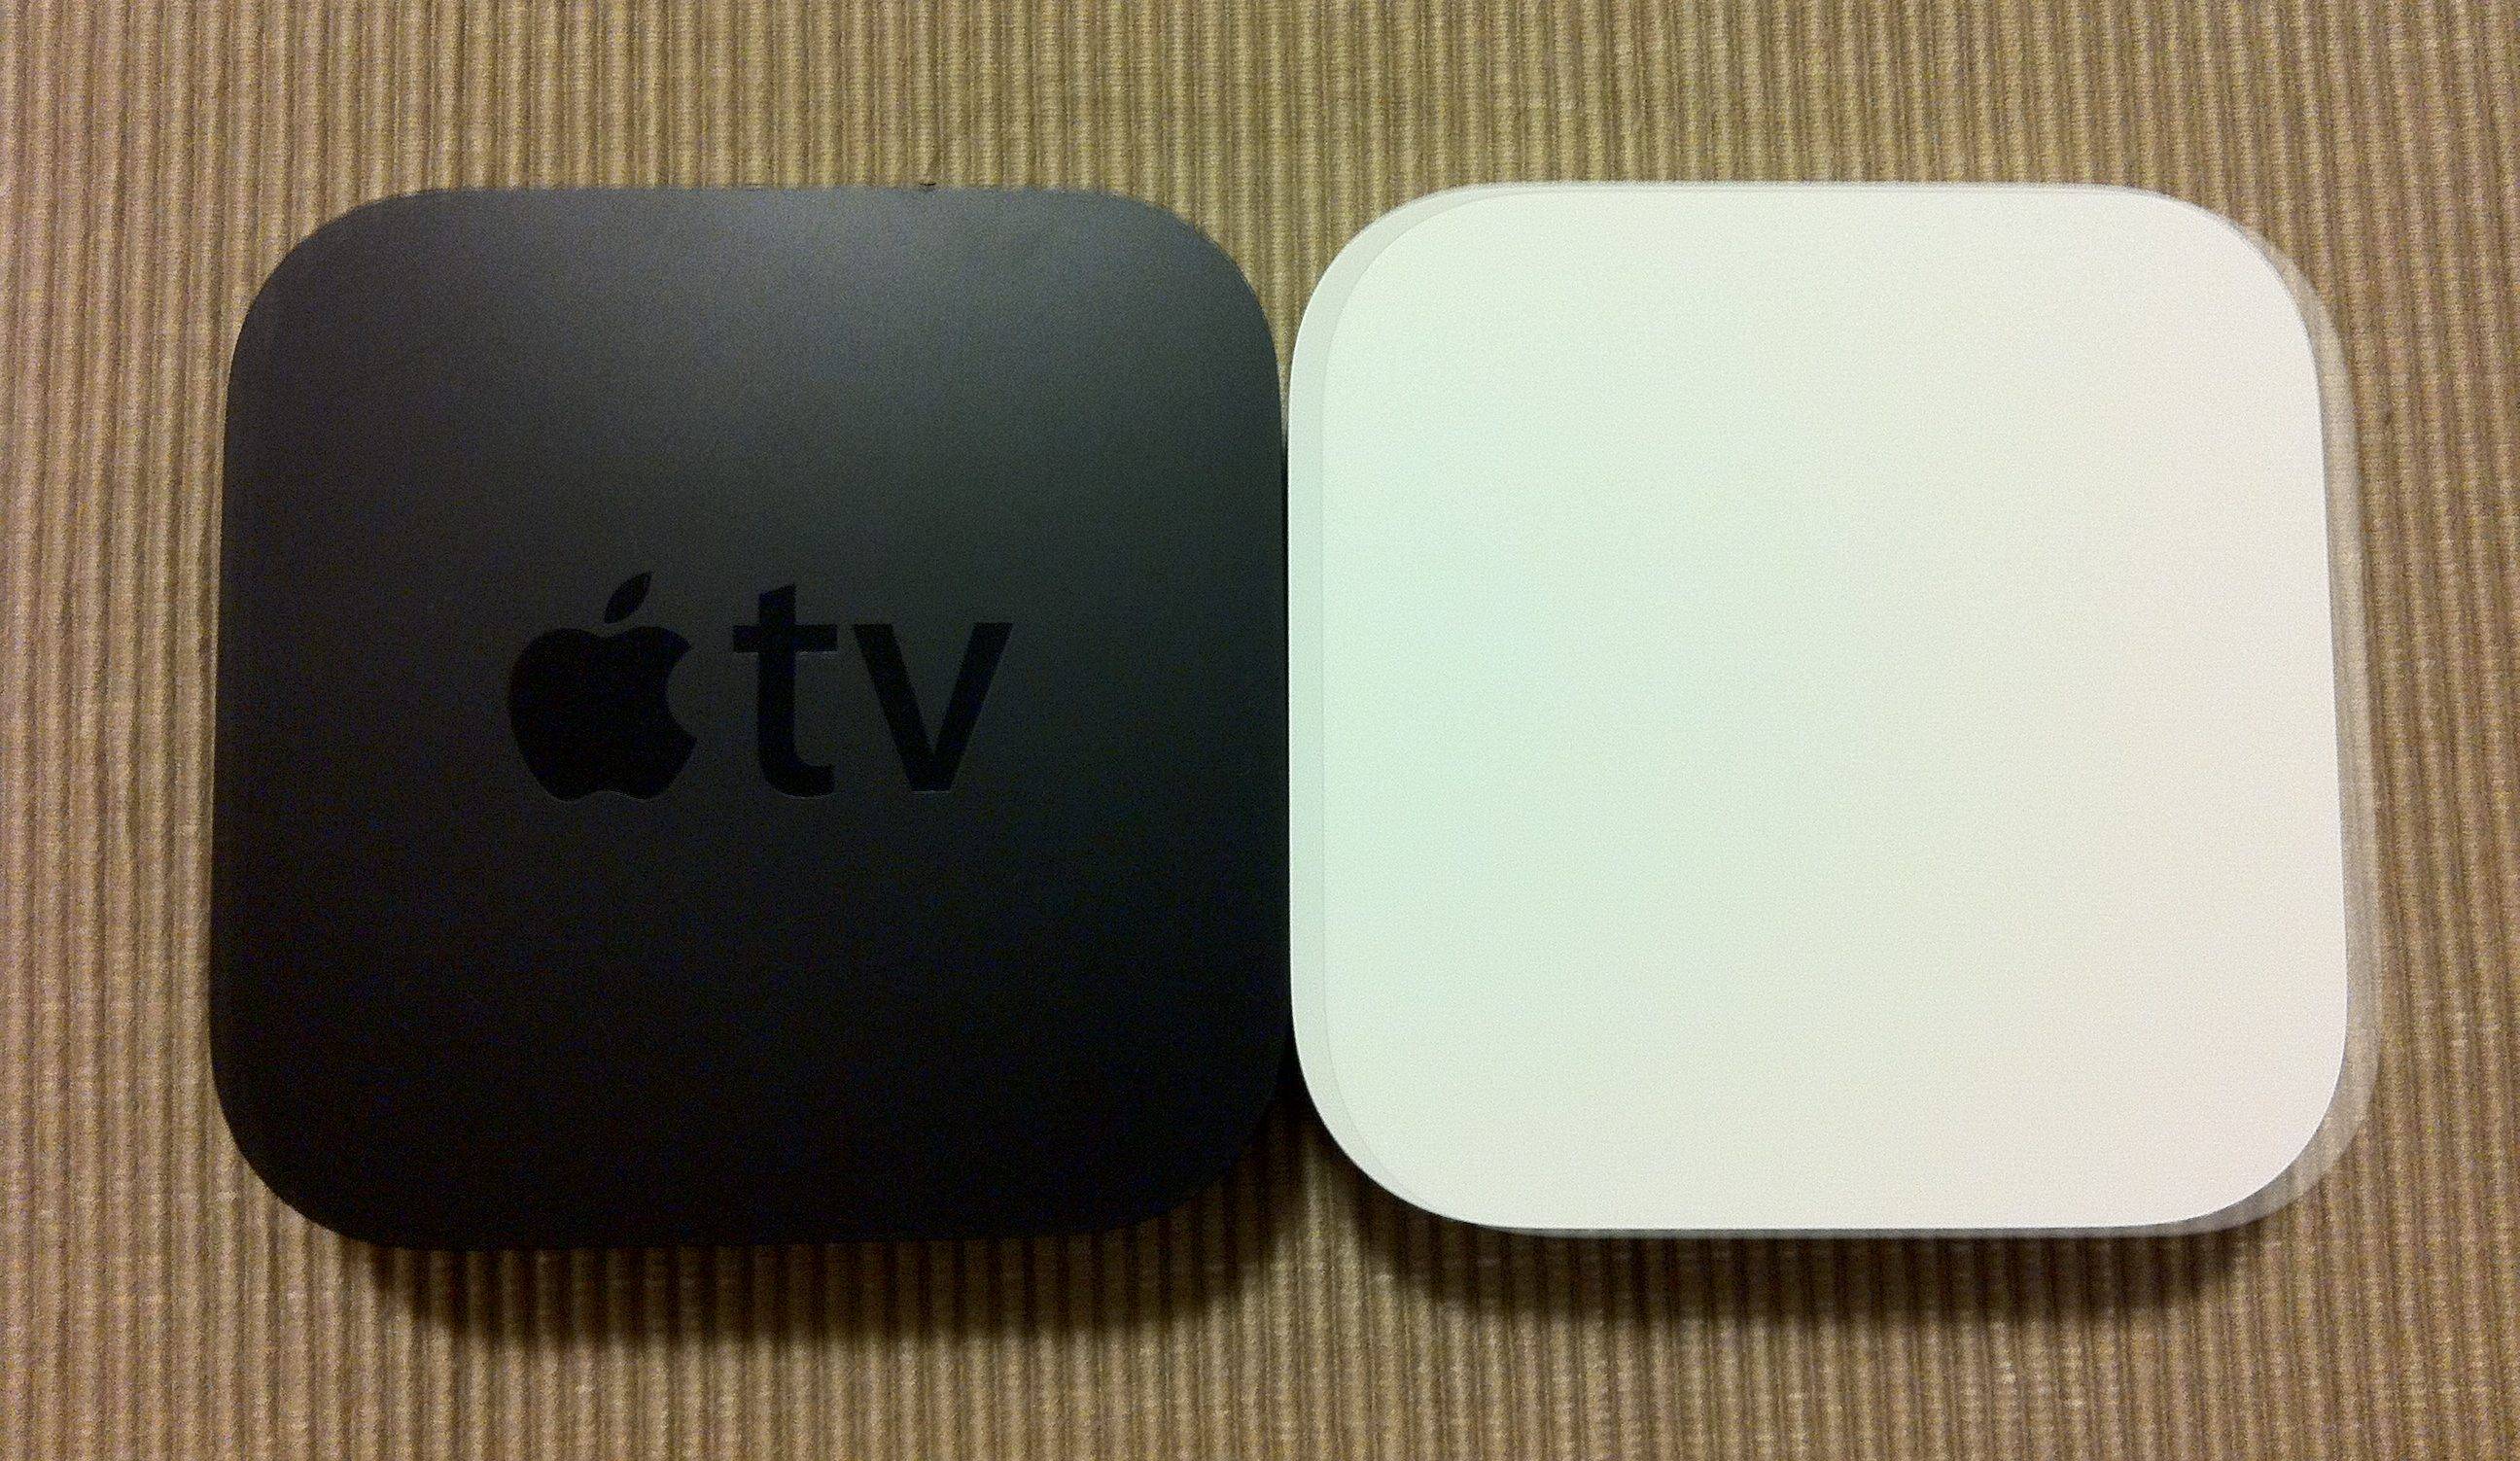 Will airport express work with any router?